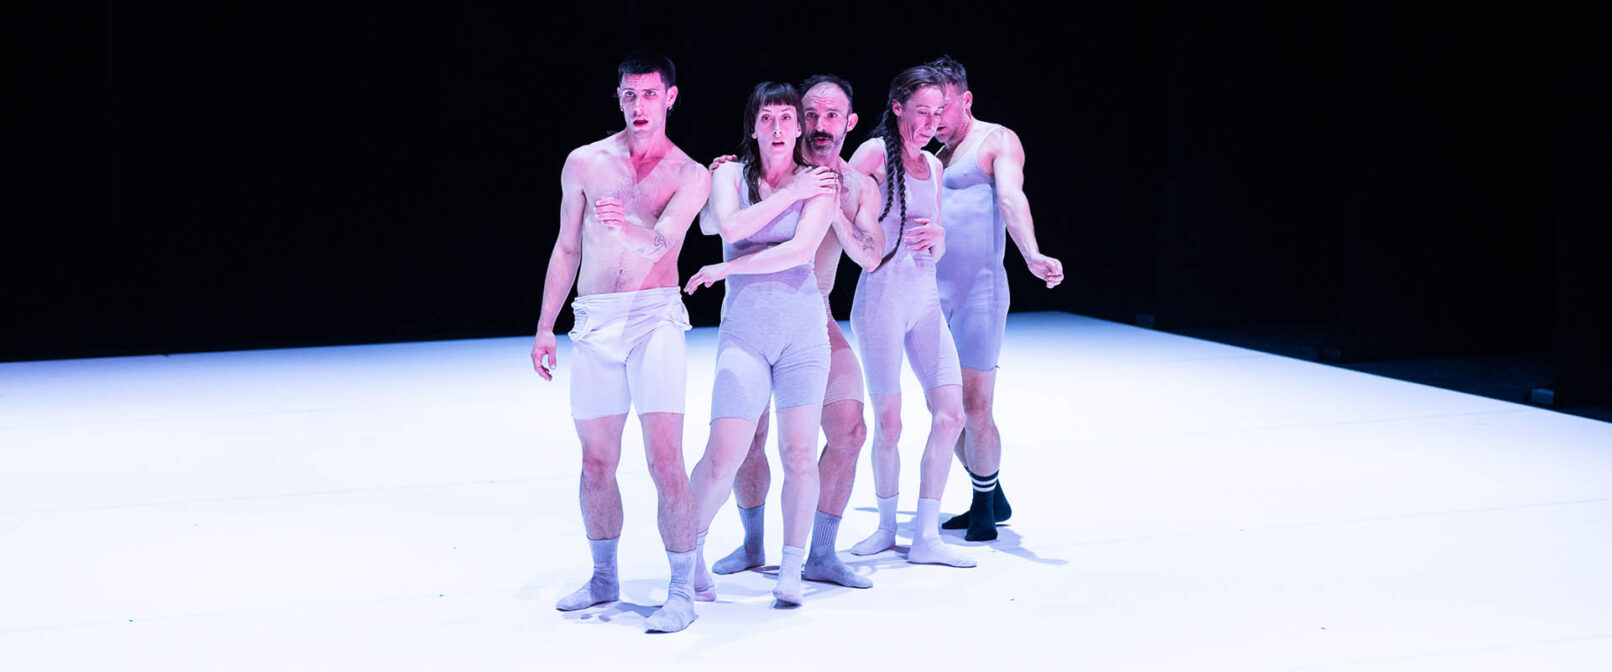 Compagnie Catherine Gaudet. Five fair skinned dancers stand grouped tightly together on a white stage, facing forward. They are wearing white and light grey tight sleeveless, and thigh length body suits.